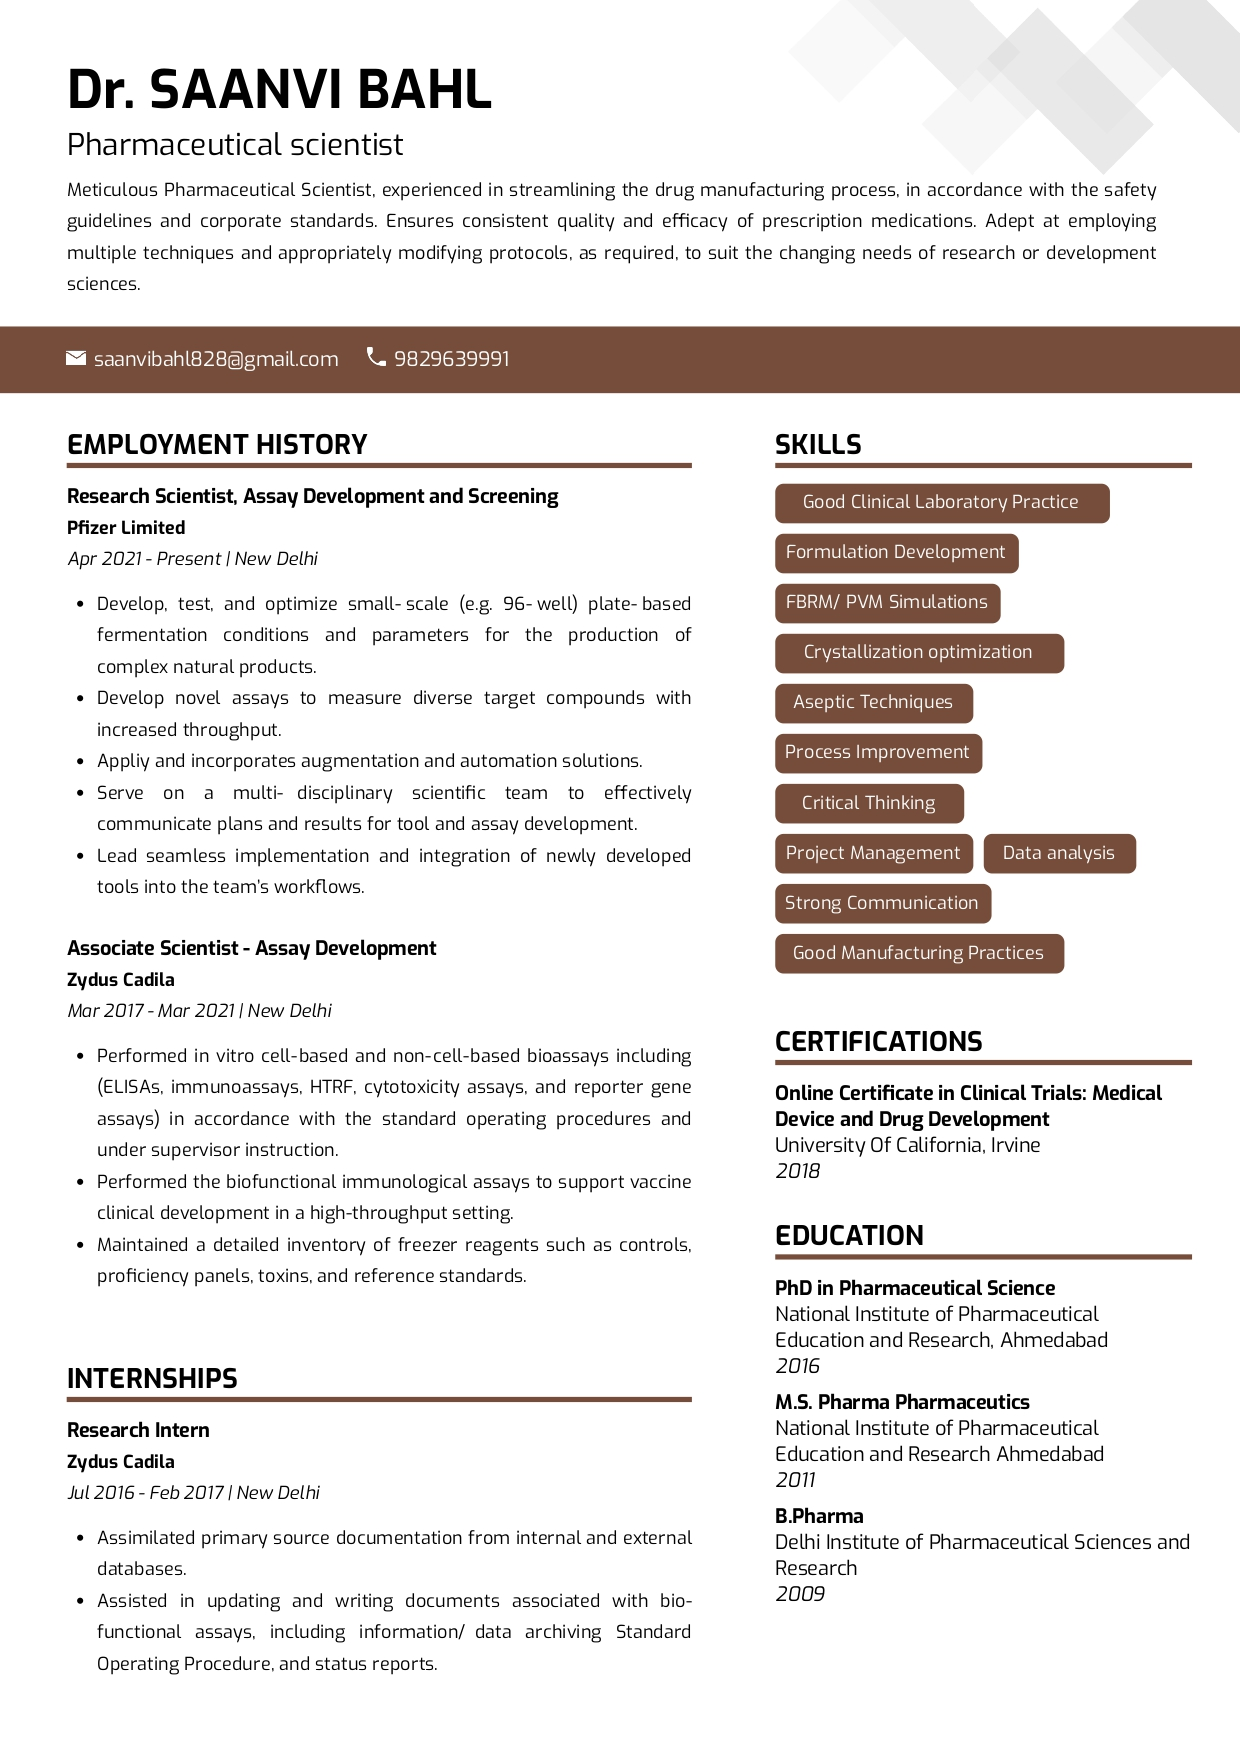 resume career objective pharmaceutical industry